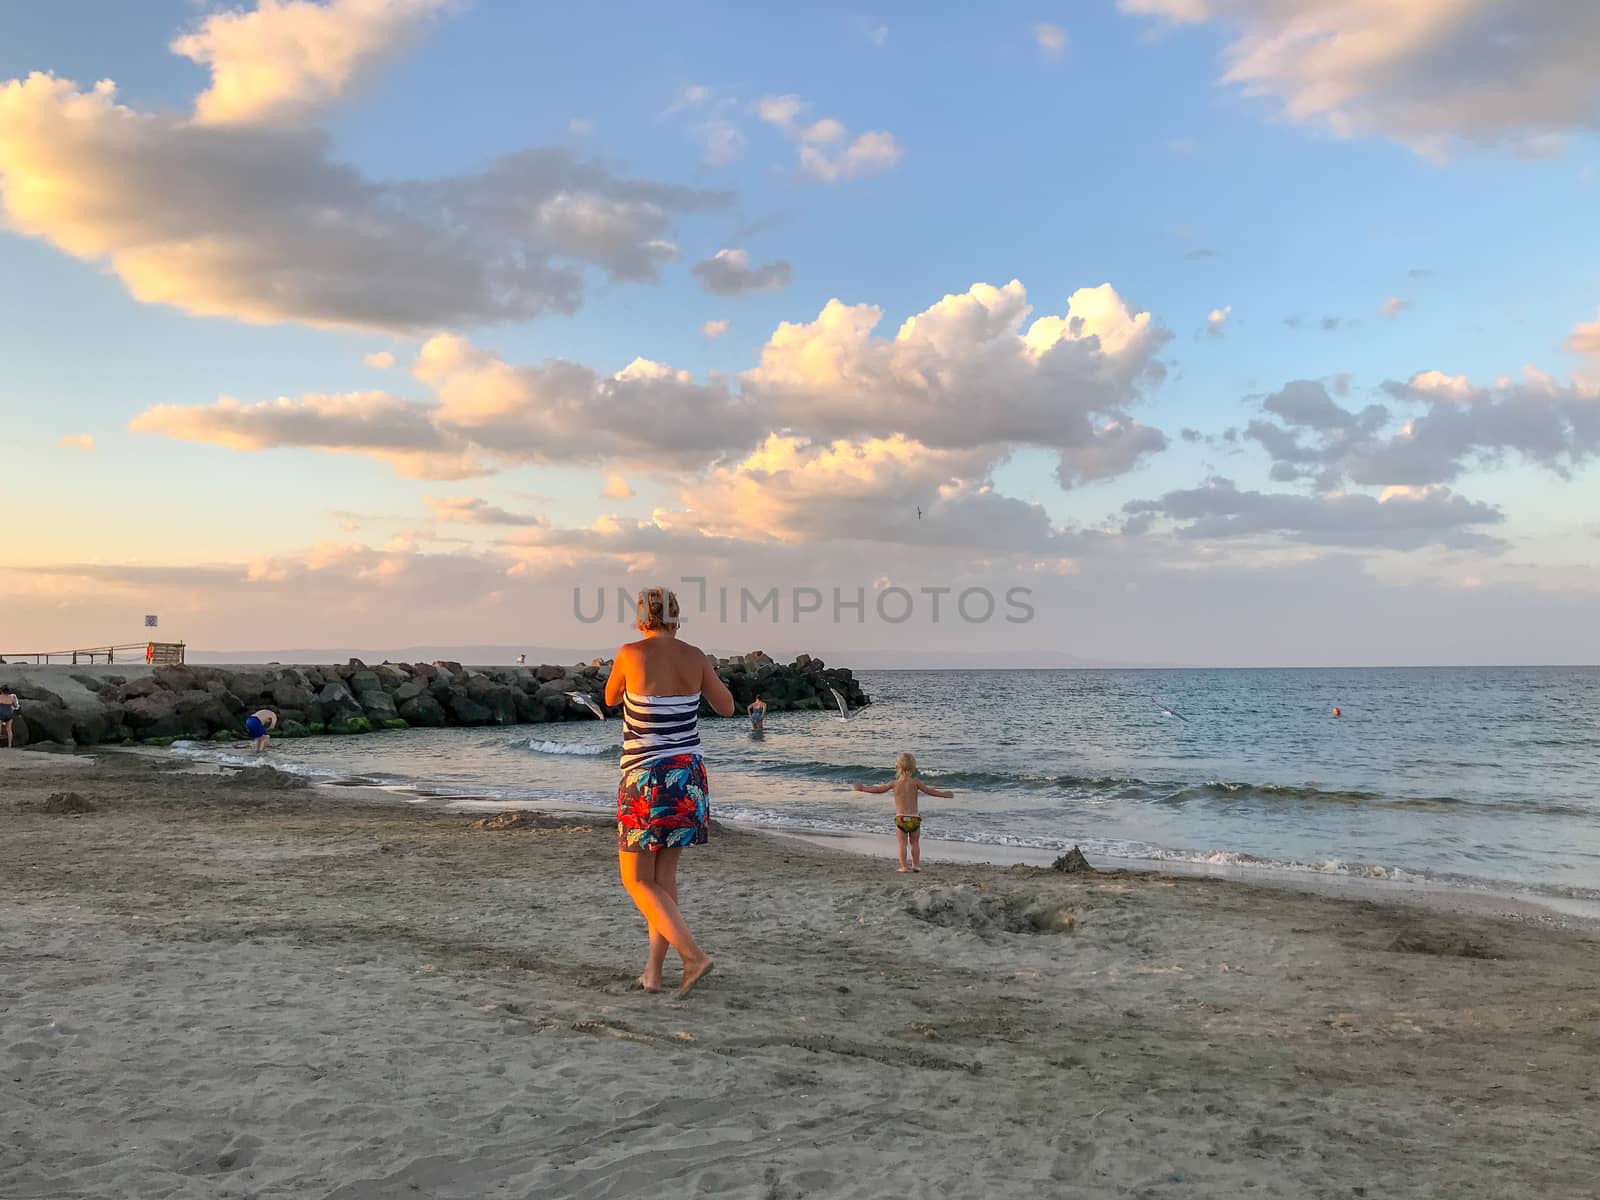 Pomorie, Bulgaria - July 08, 2019: People Relaxing On The Beach.